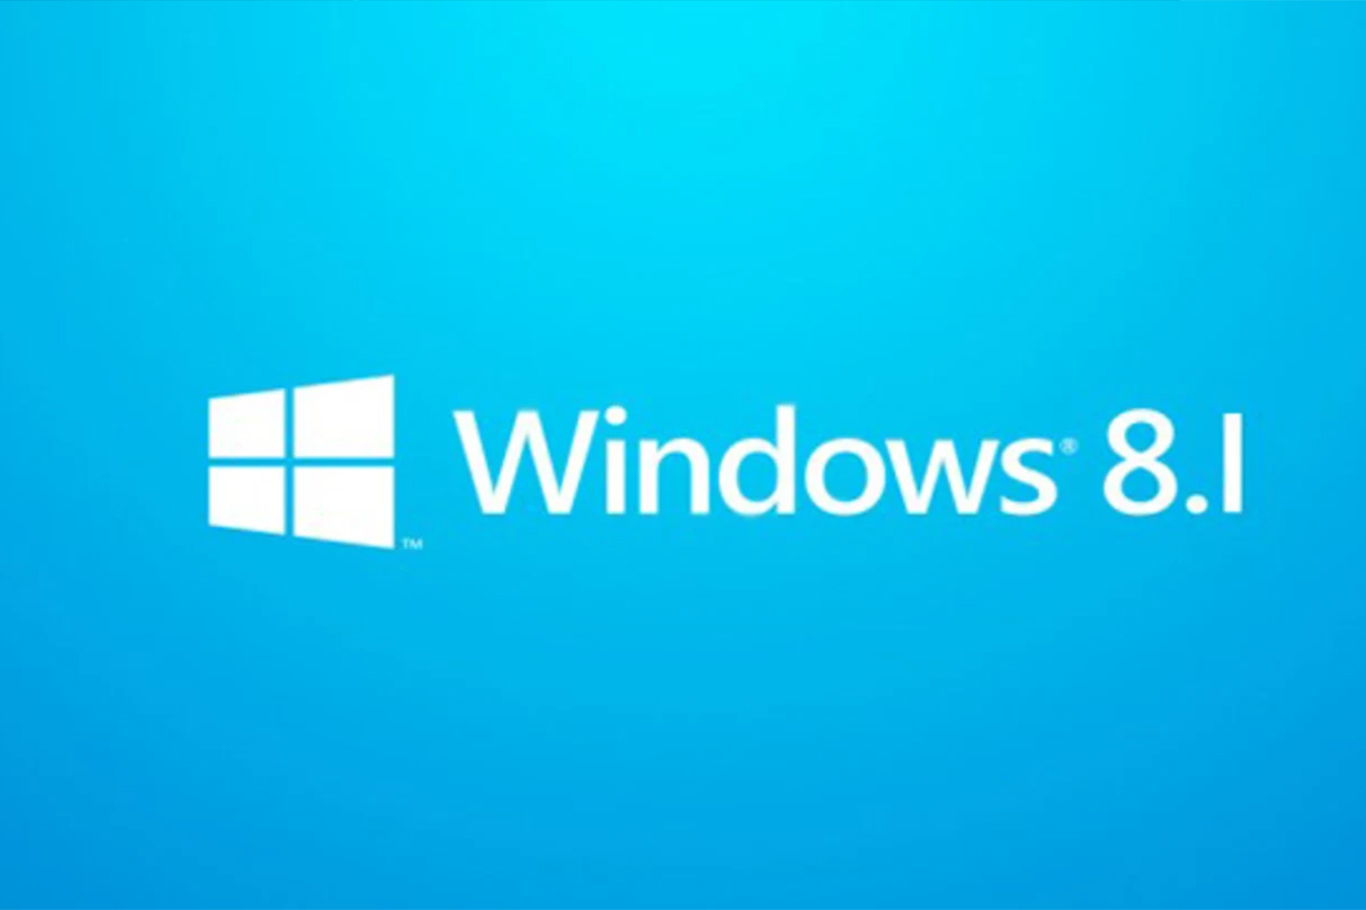 Windows 8.1 will reach the end of support on January 10-- Microsoft